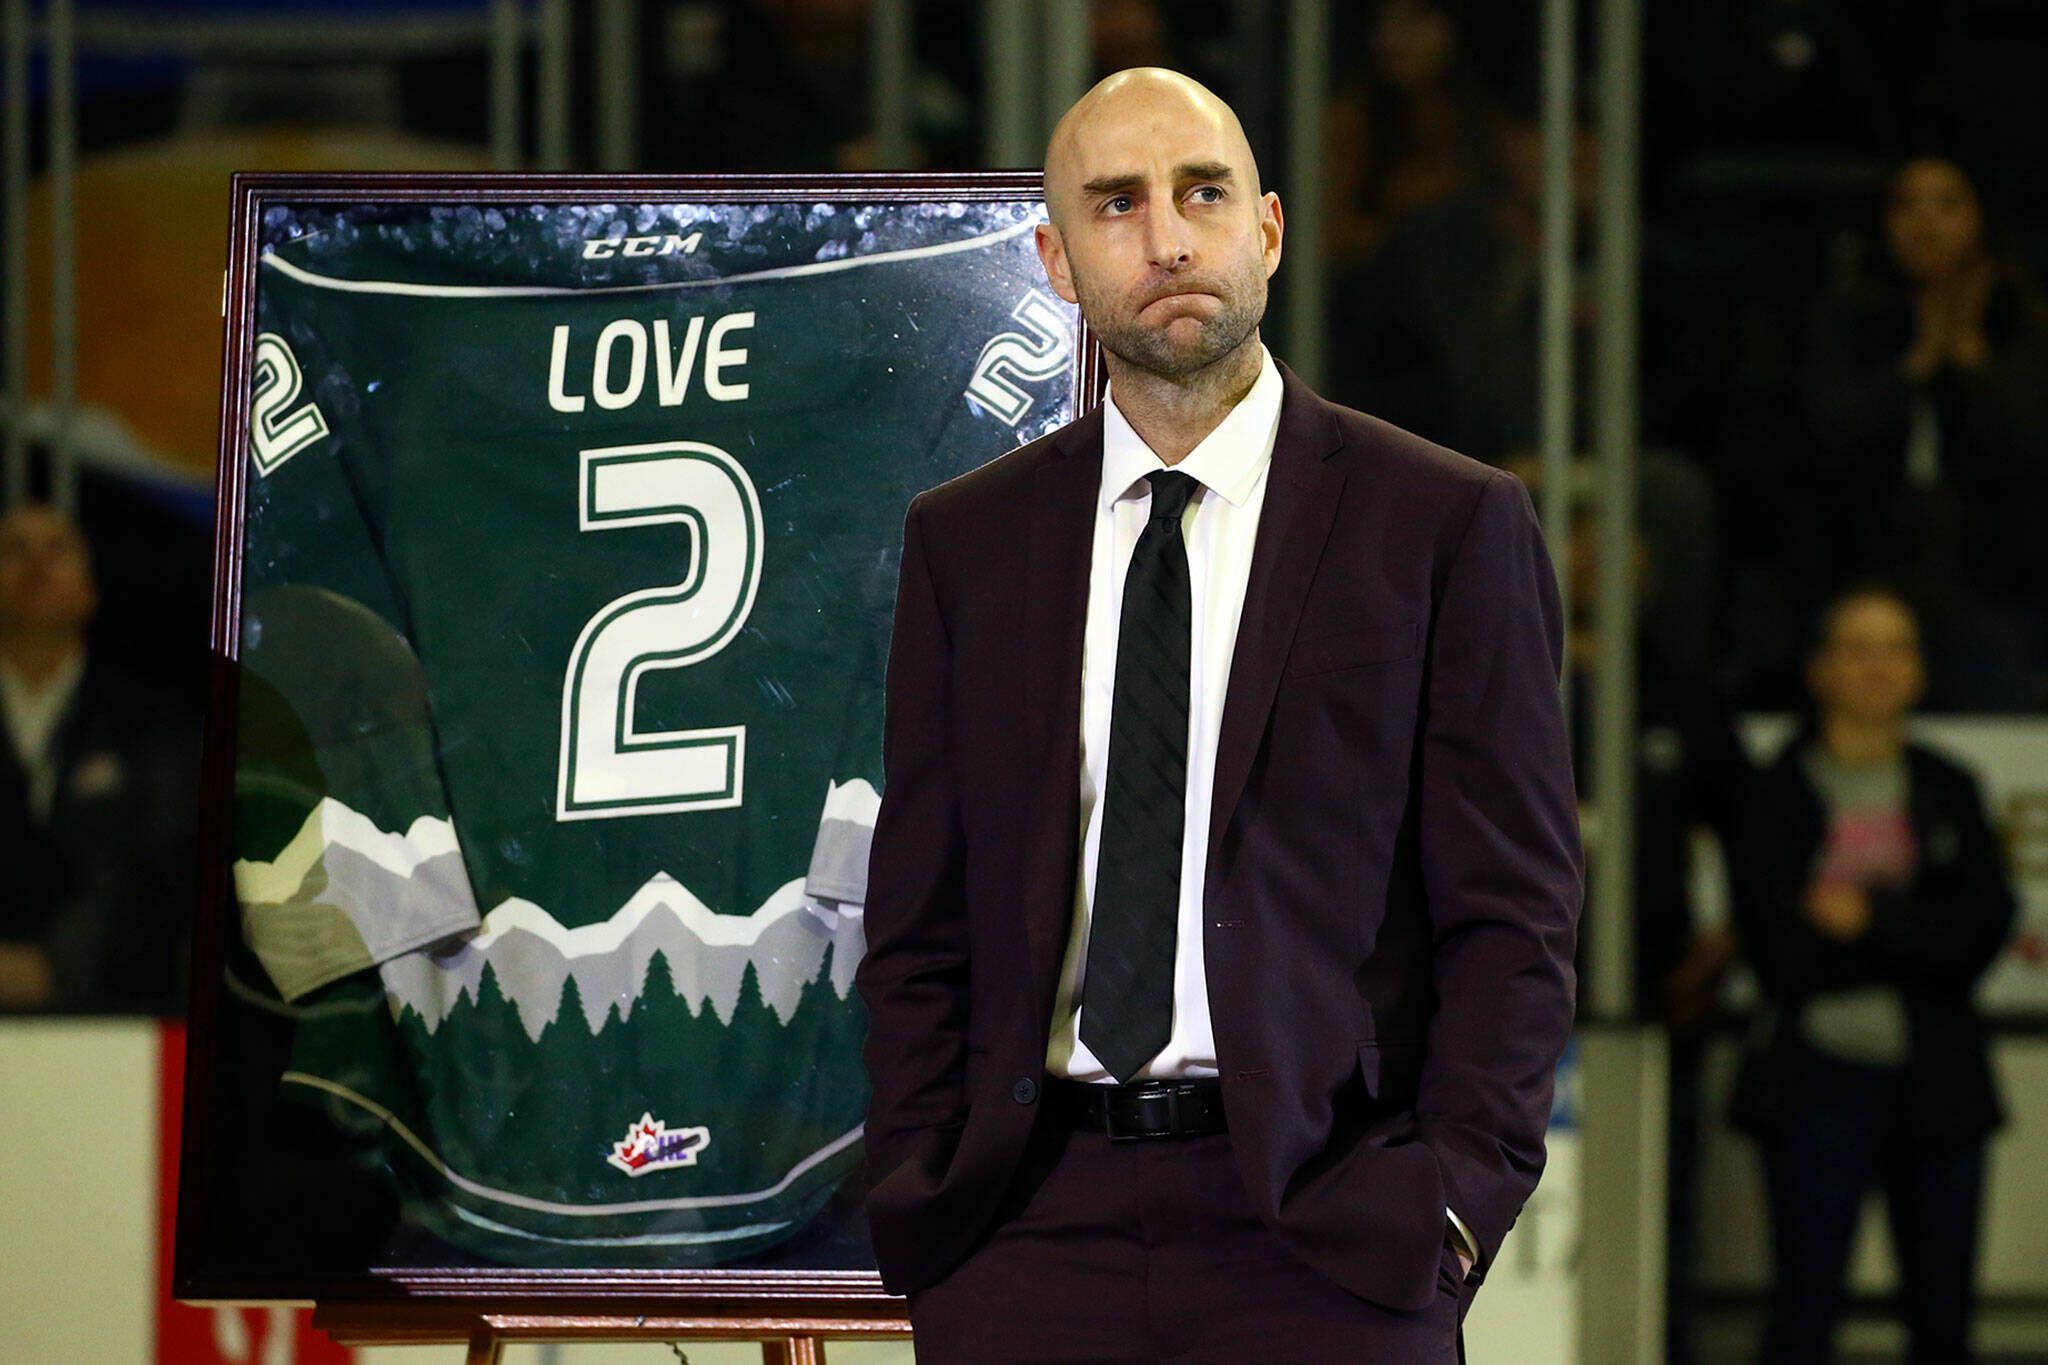 Former Silvertip Mitch Love has his jersey retired by the organization on Nov. 22, 2019, at Angel of the Winds Arena in Everett. (Kevin Clark / The Herald)